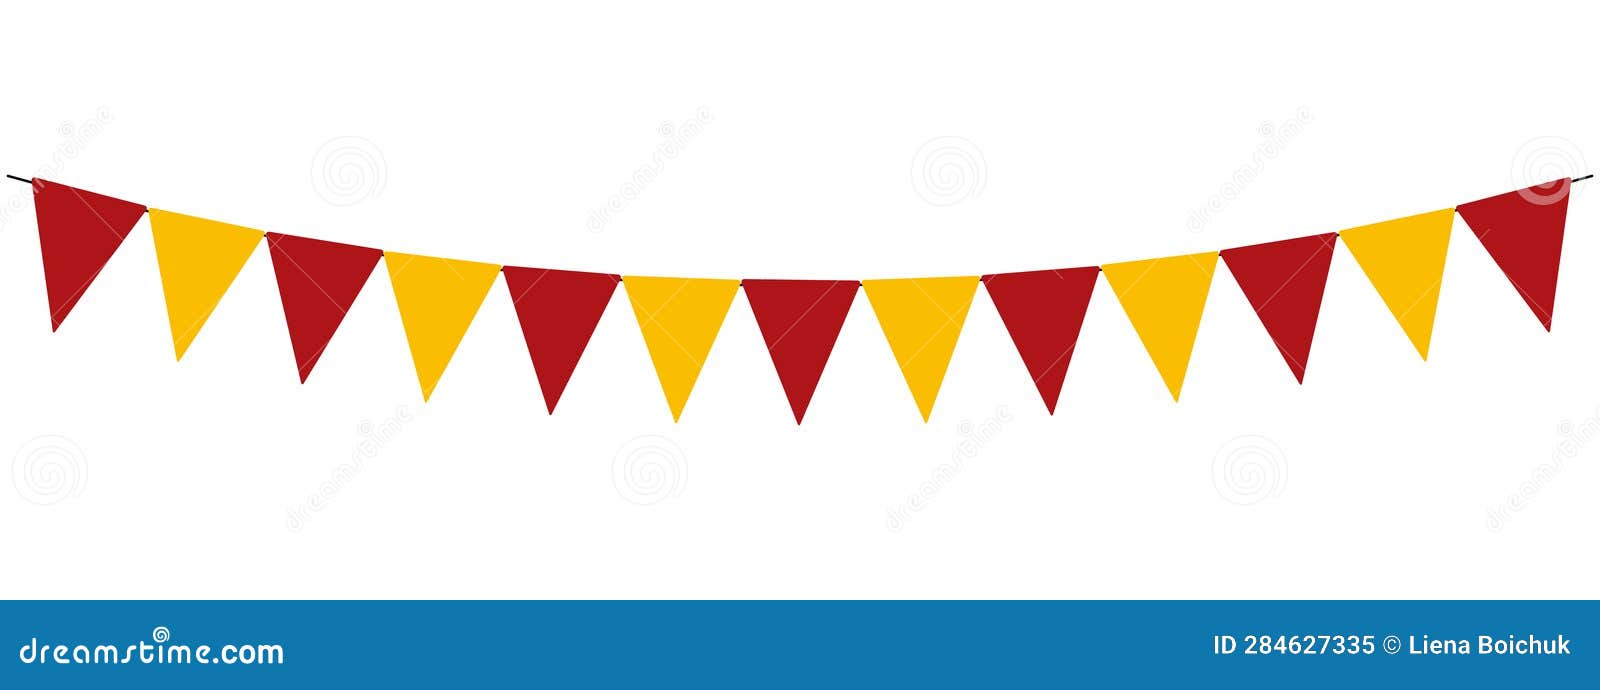 bunting garland, red and yellow, string of triangular flags, pennants,  decorative , spanish national day